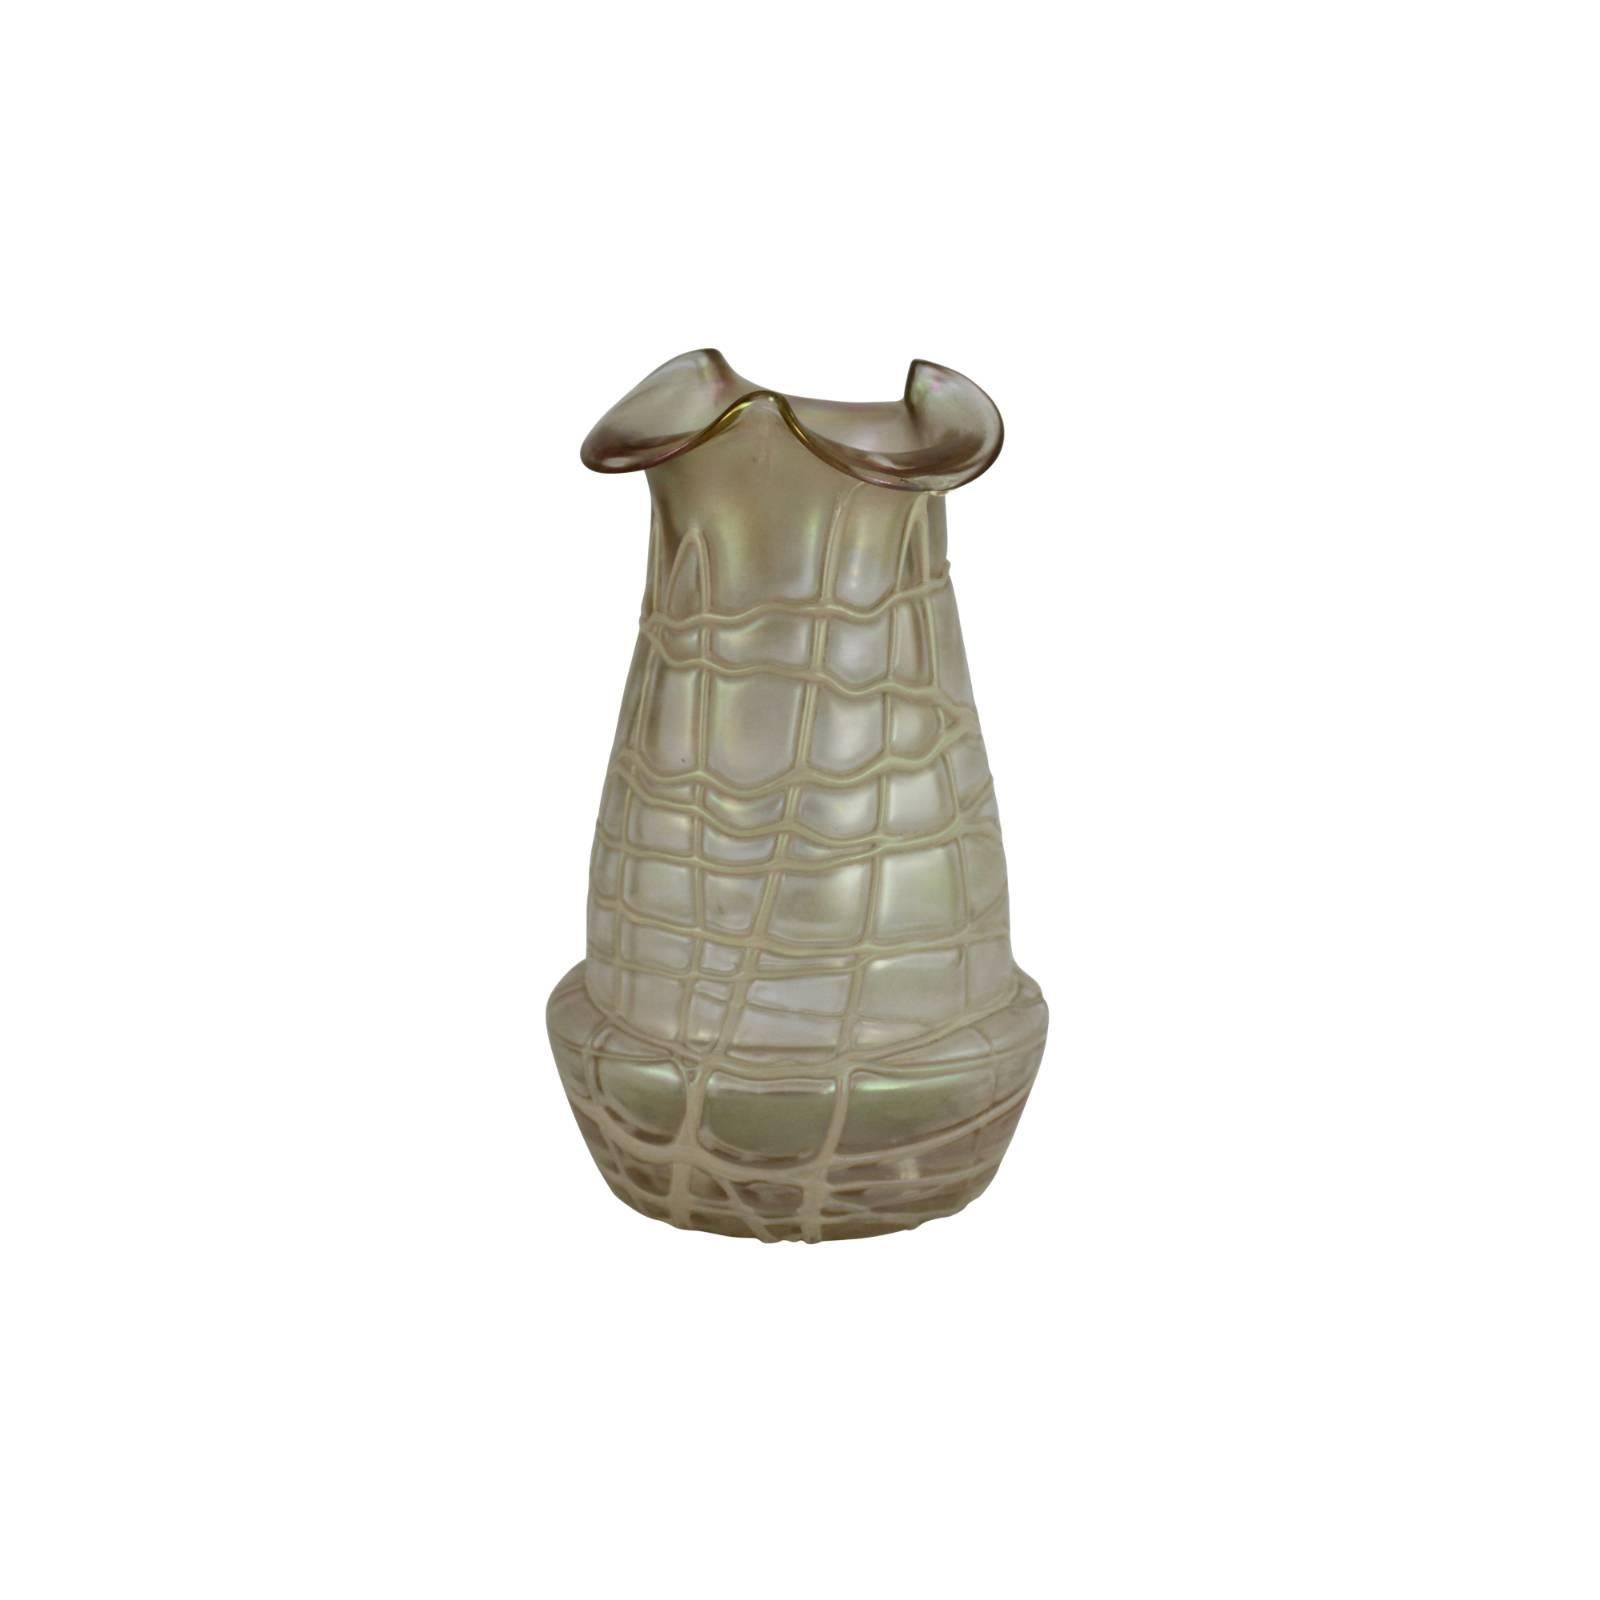 Loetz Bohemian Glass Vase with Stringed Cream Glass Overlay In Excellent Condition For Sale In Brisbane, Queensland